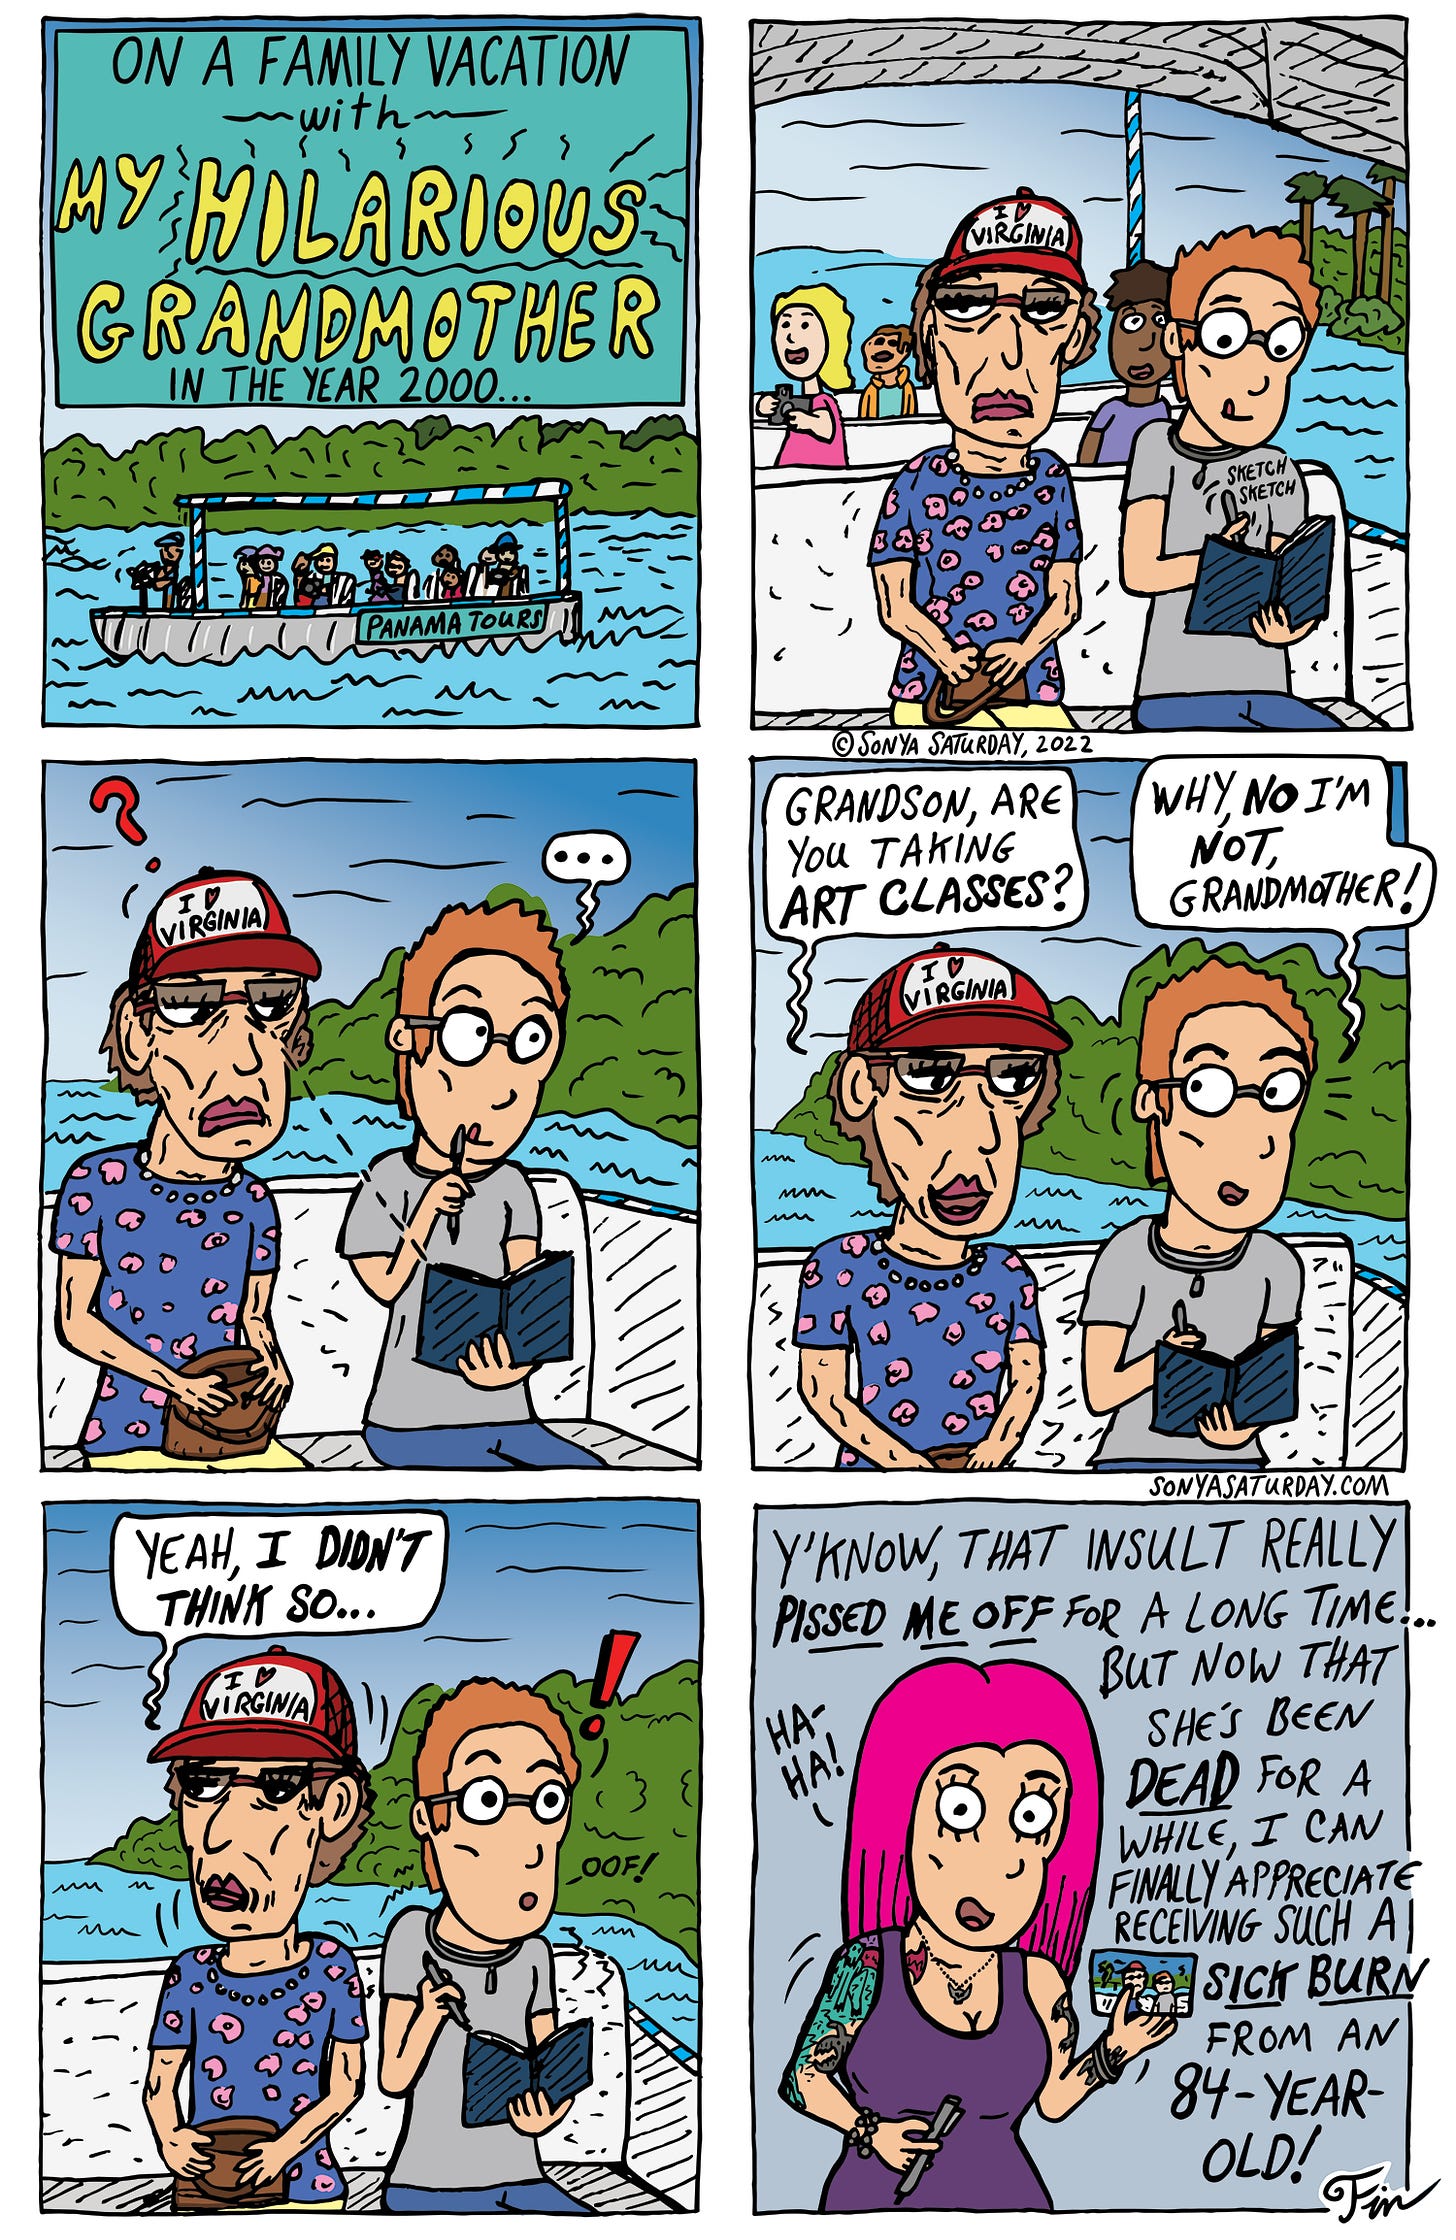 Colorful comic strip about Sonya Saturday's grandmother delivering her a sick burn while on vacation